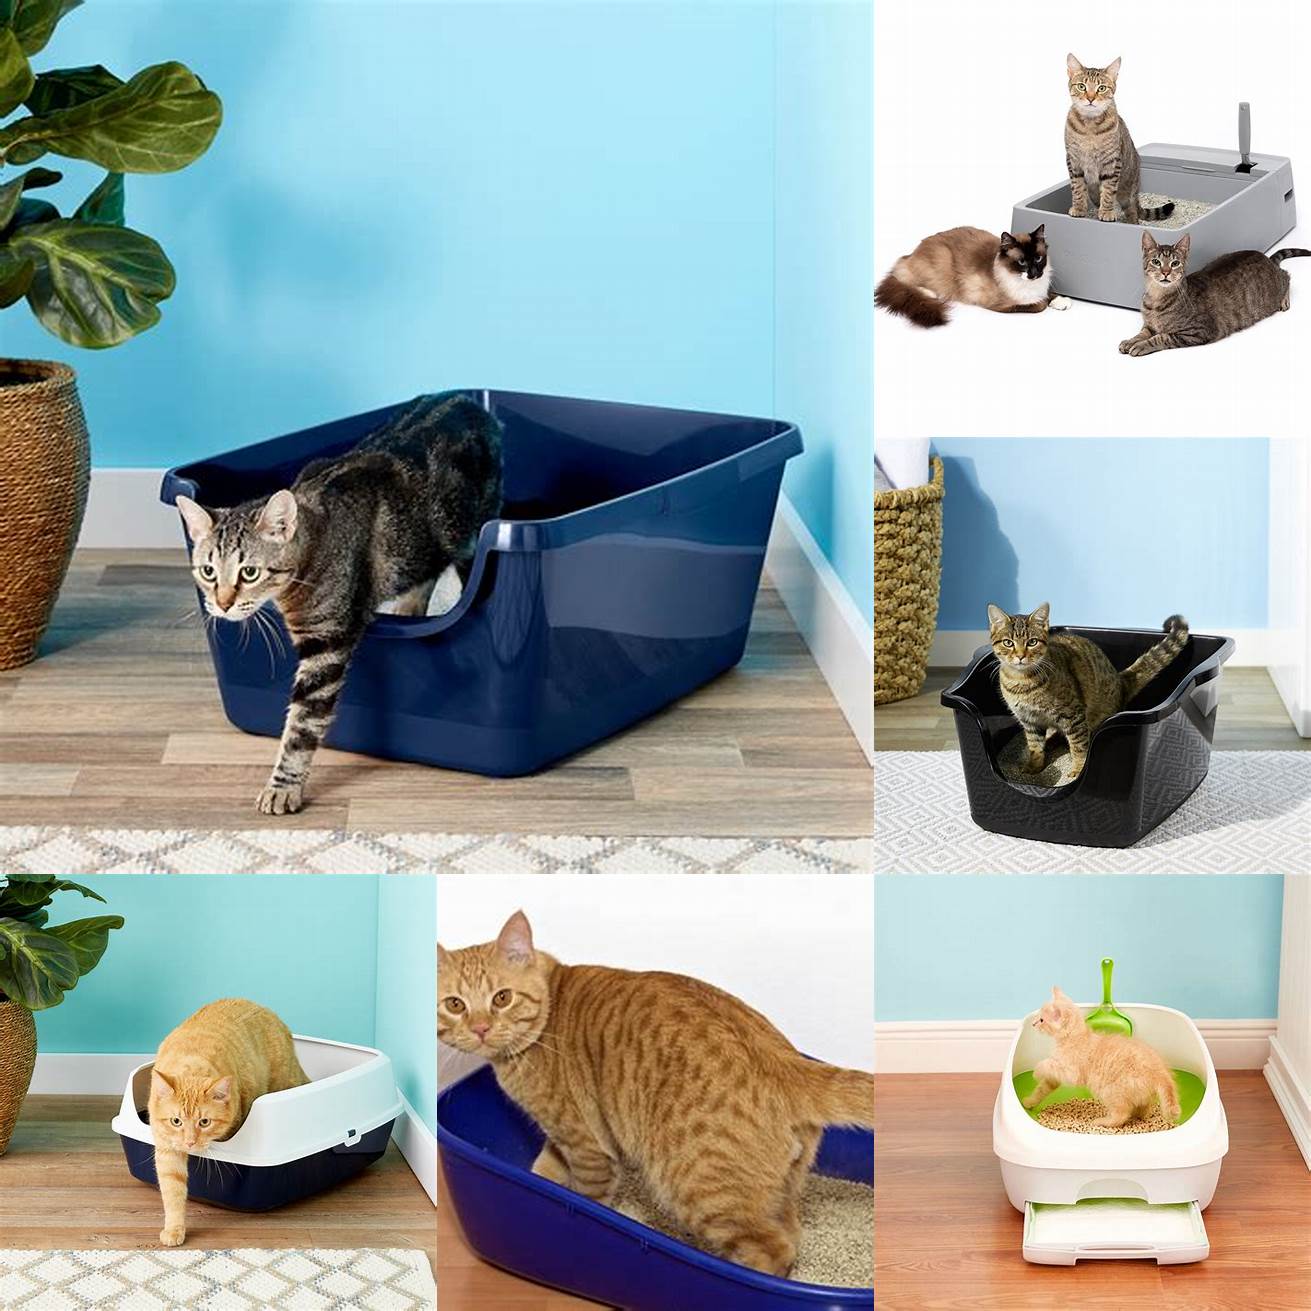 Provide separate litter boxes for each pet to prevent any territorial disputes